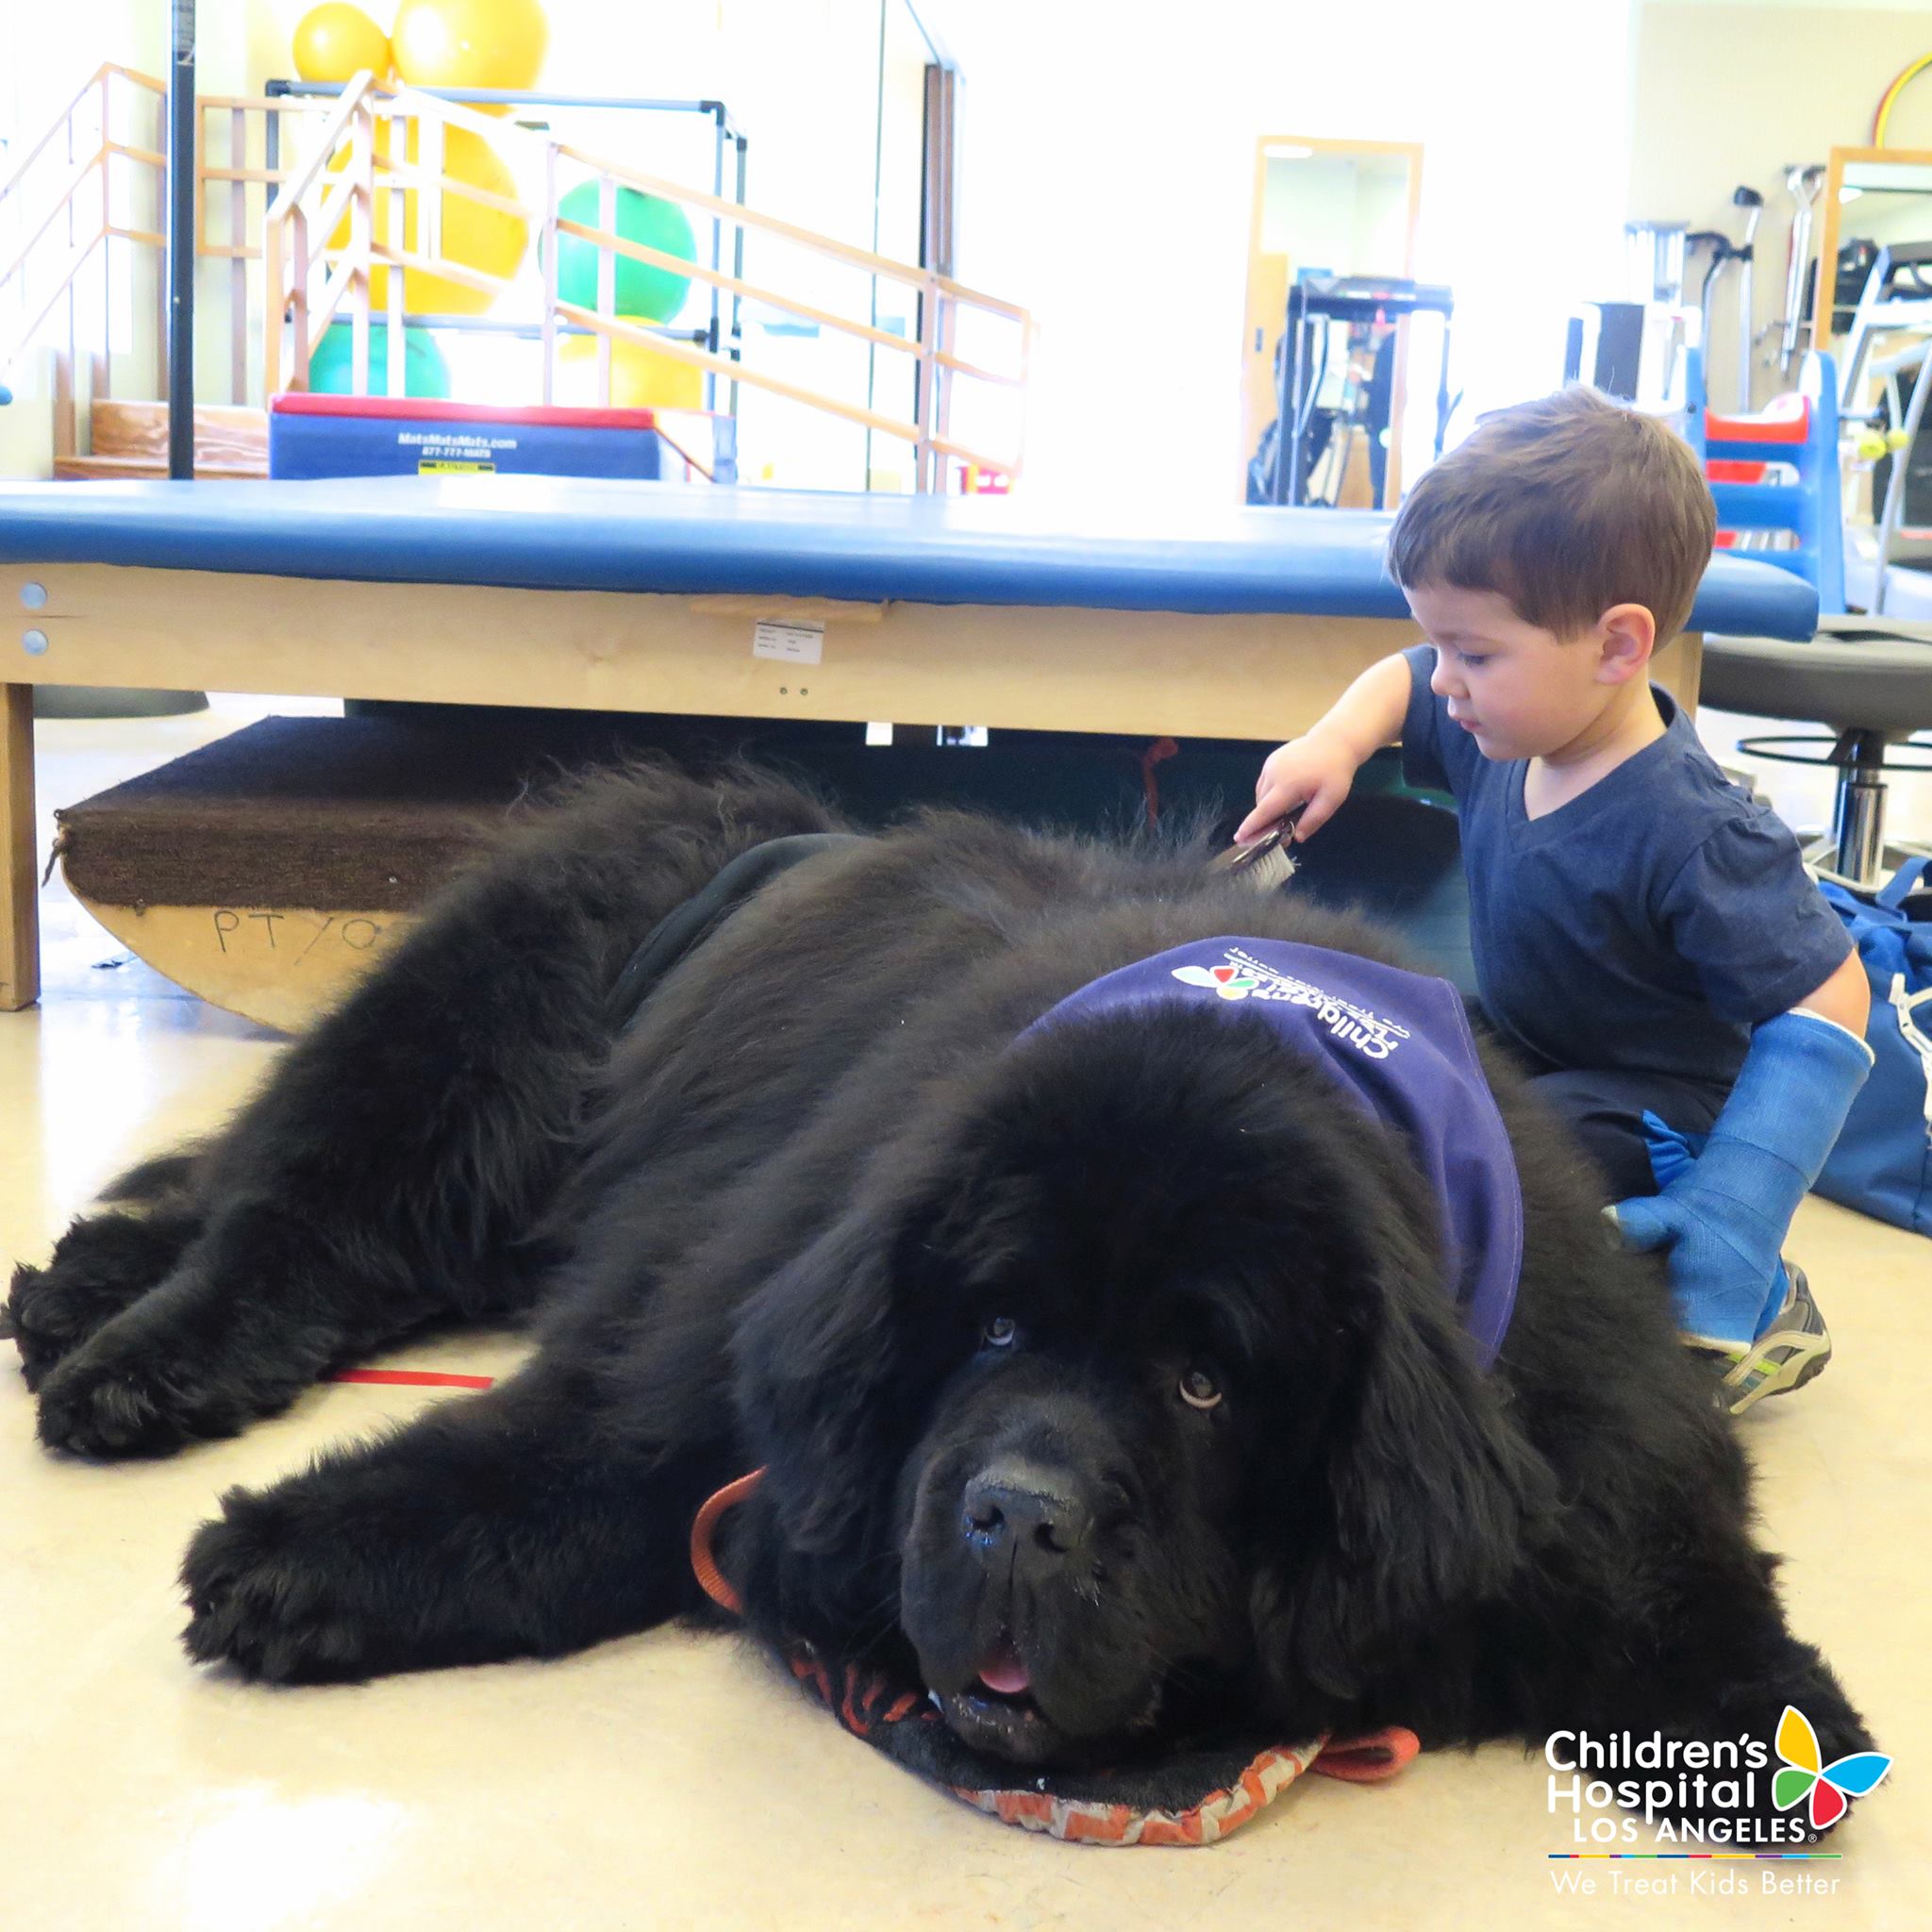 Meet Bonner, the grand therapy dog at Children's Hospital.